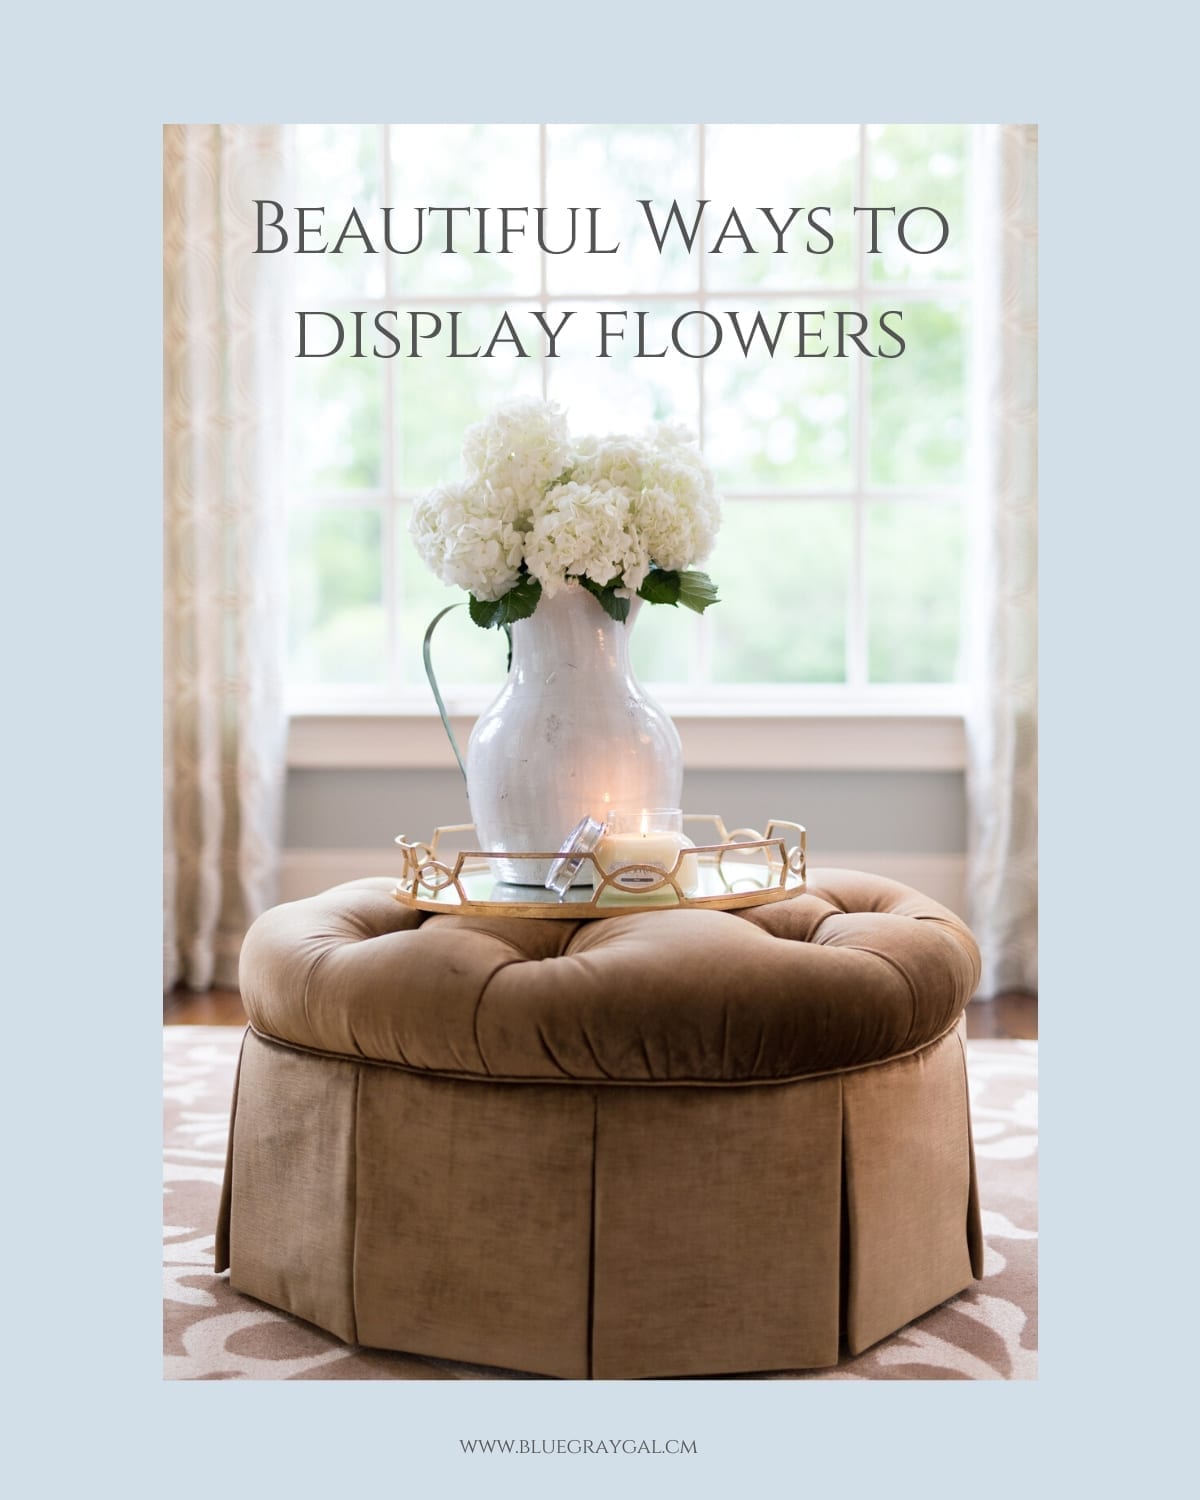 Beautiful ways to display flowers at home.